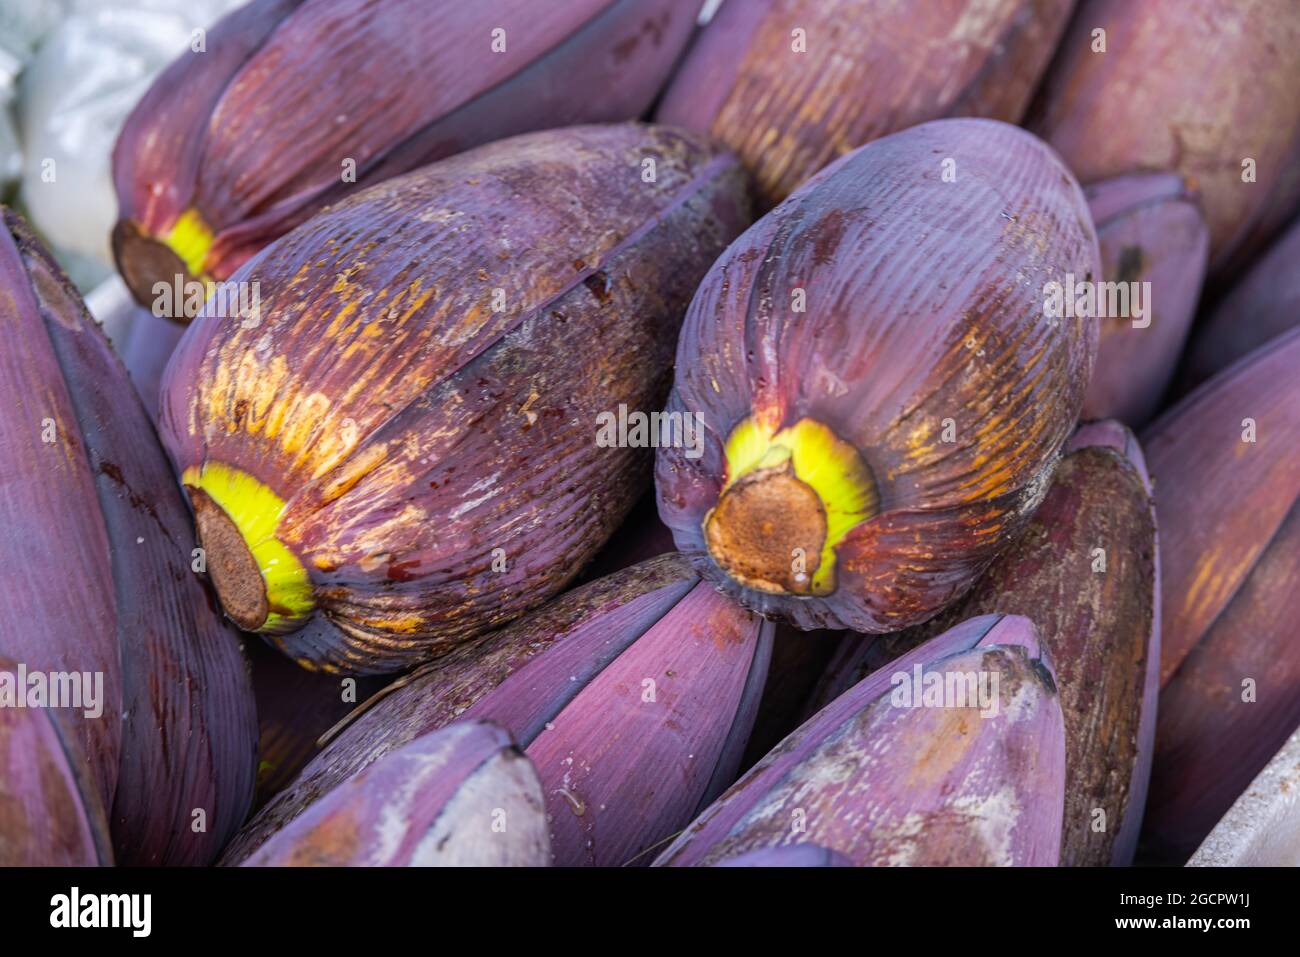 A bunch of Banana blossom or  Banana heart on a counter in a fresh market at Kuala Lumpur, Malaysia. The banana flower is used in asia for cooking as Stock Photo